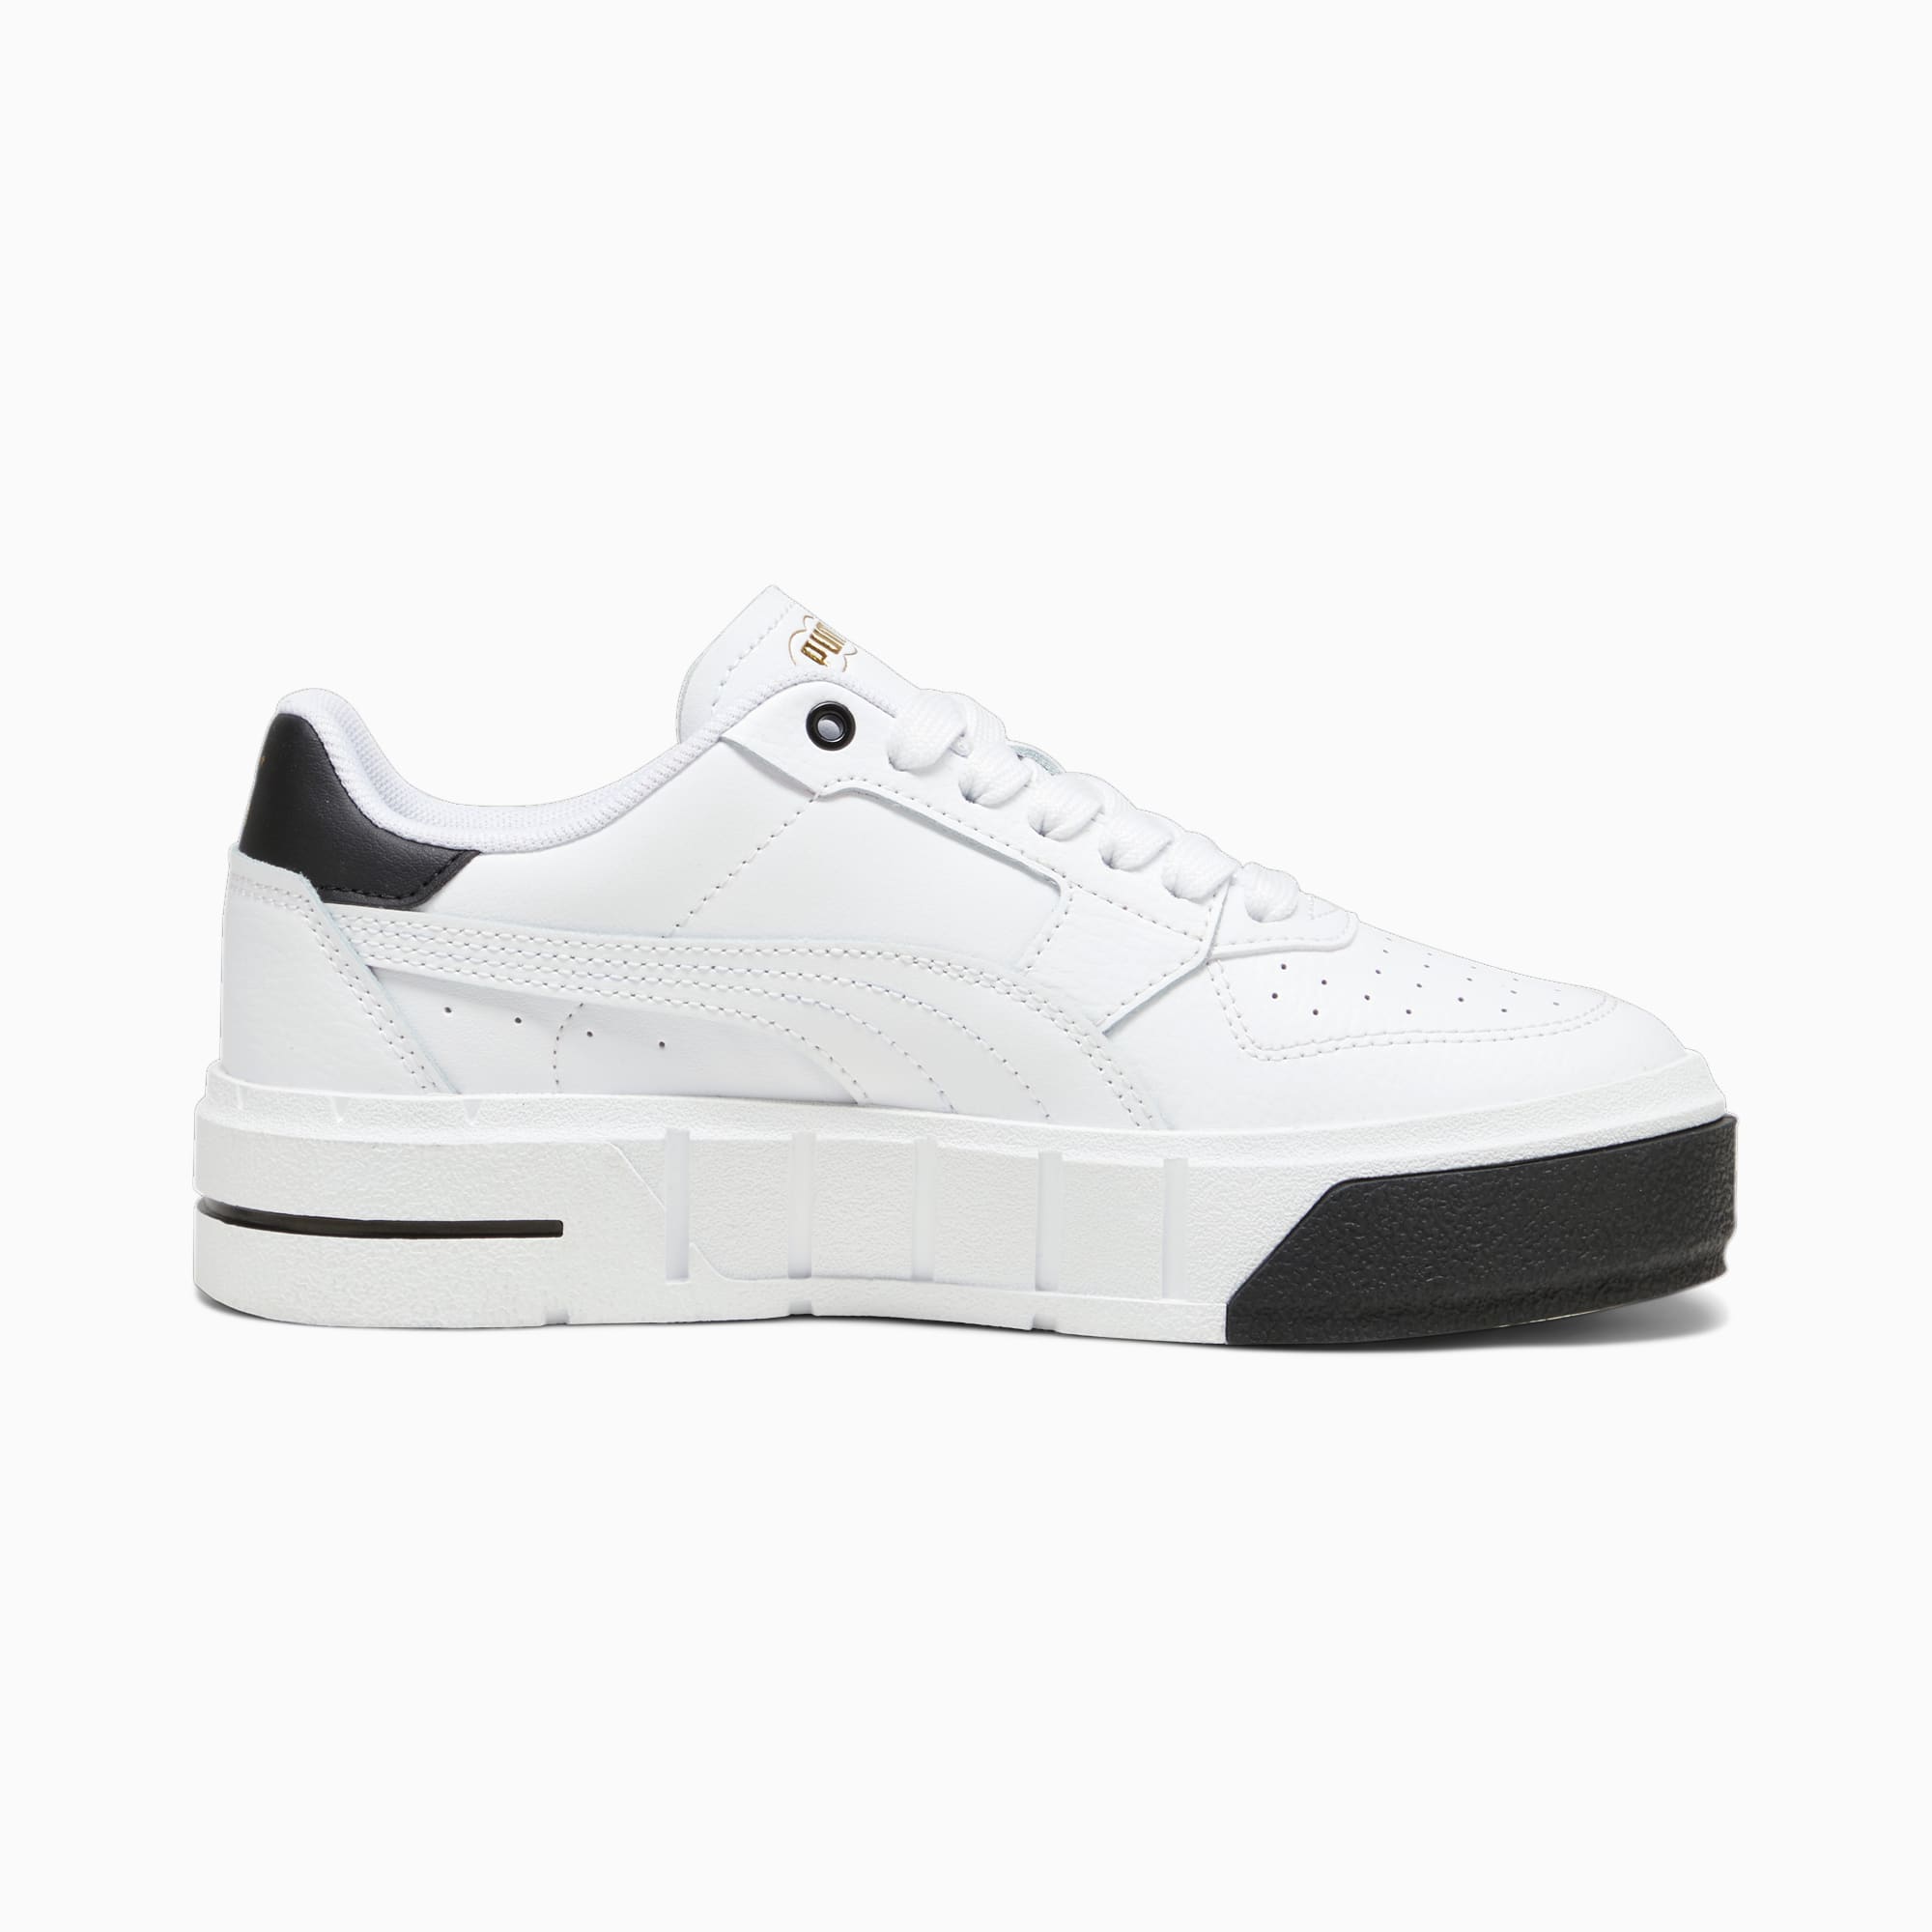 PUMA Cali Court Youth Leather Sneakers, White/Black